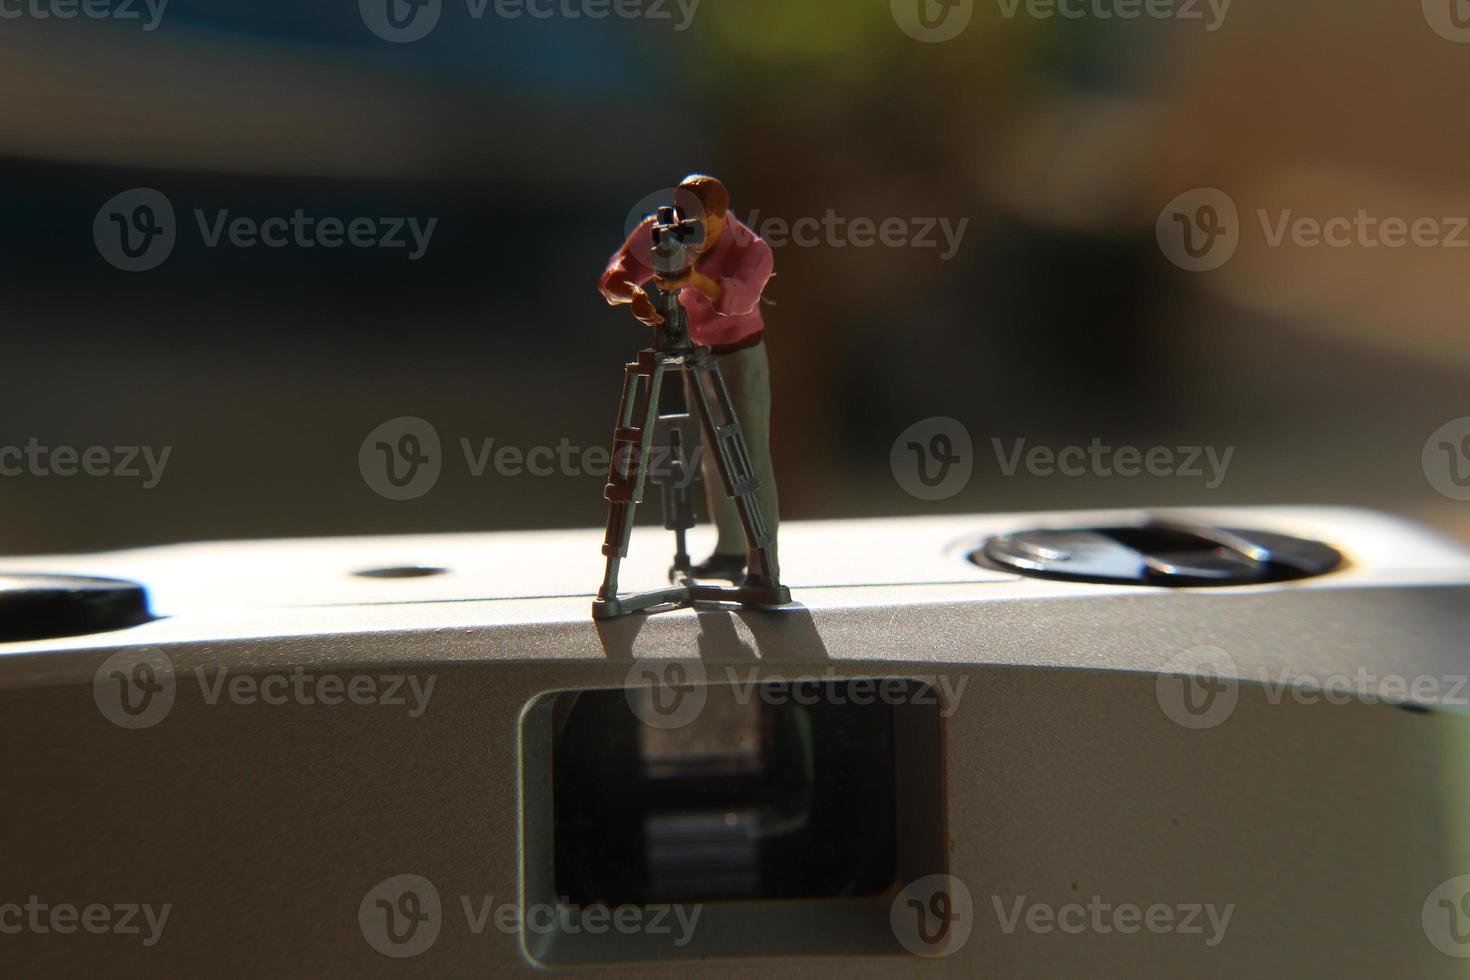 miniature figure of a videographer recording on an analog camera. photo